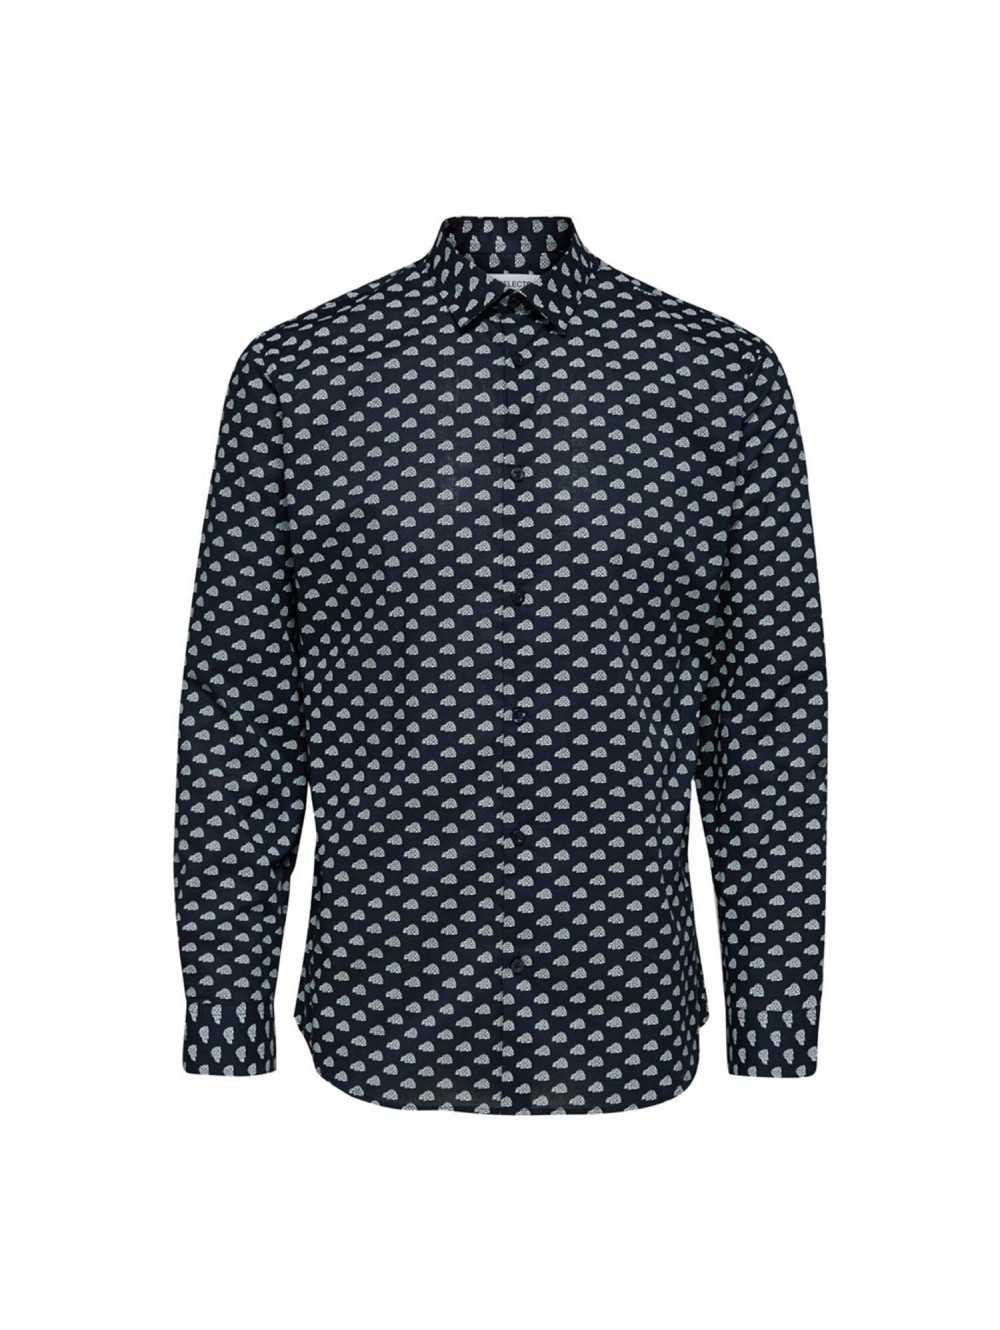 SLIMCHRISTMAS - CAMISA - SELECTED -...